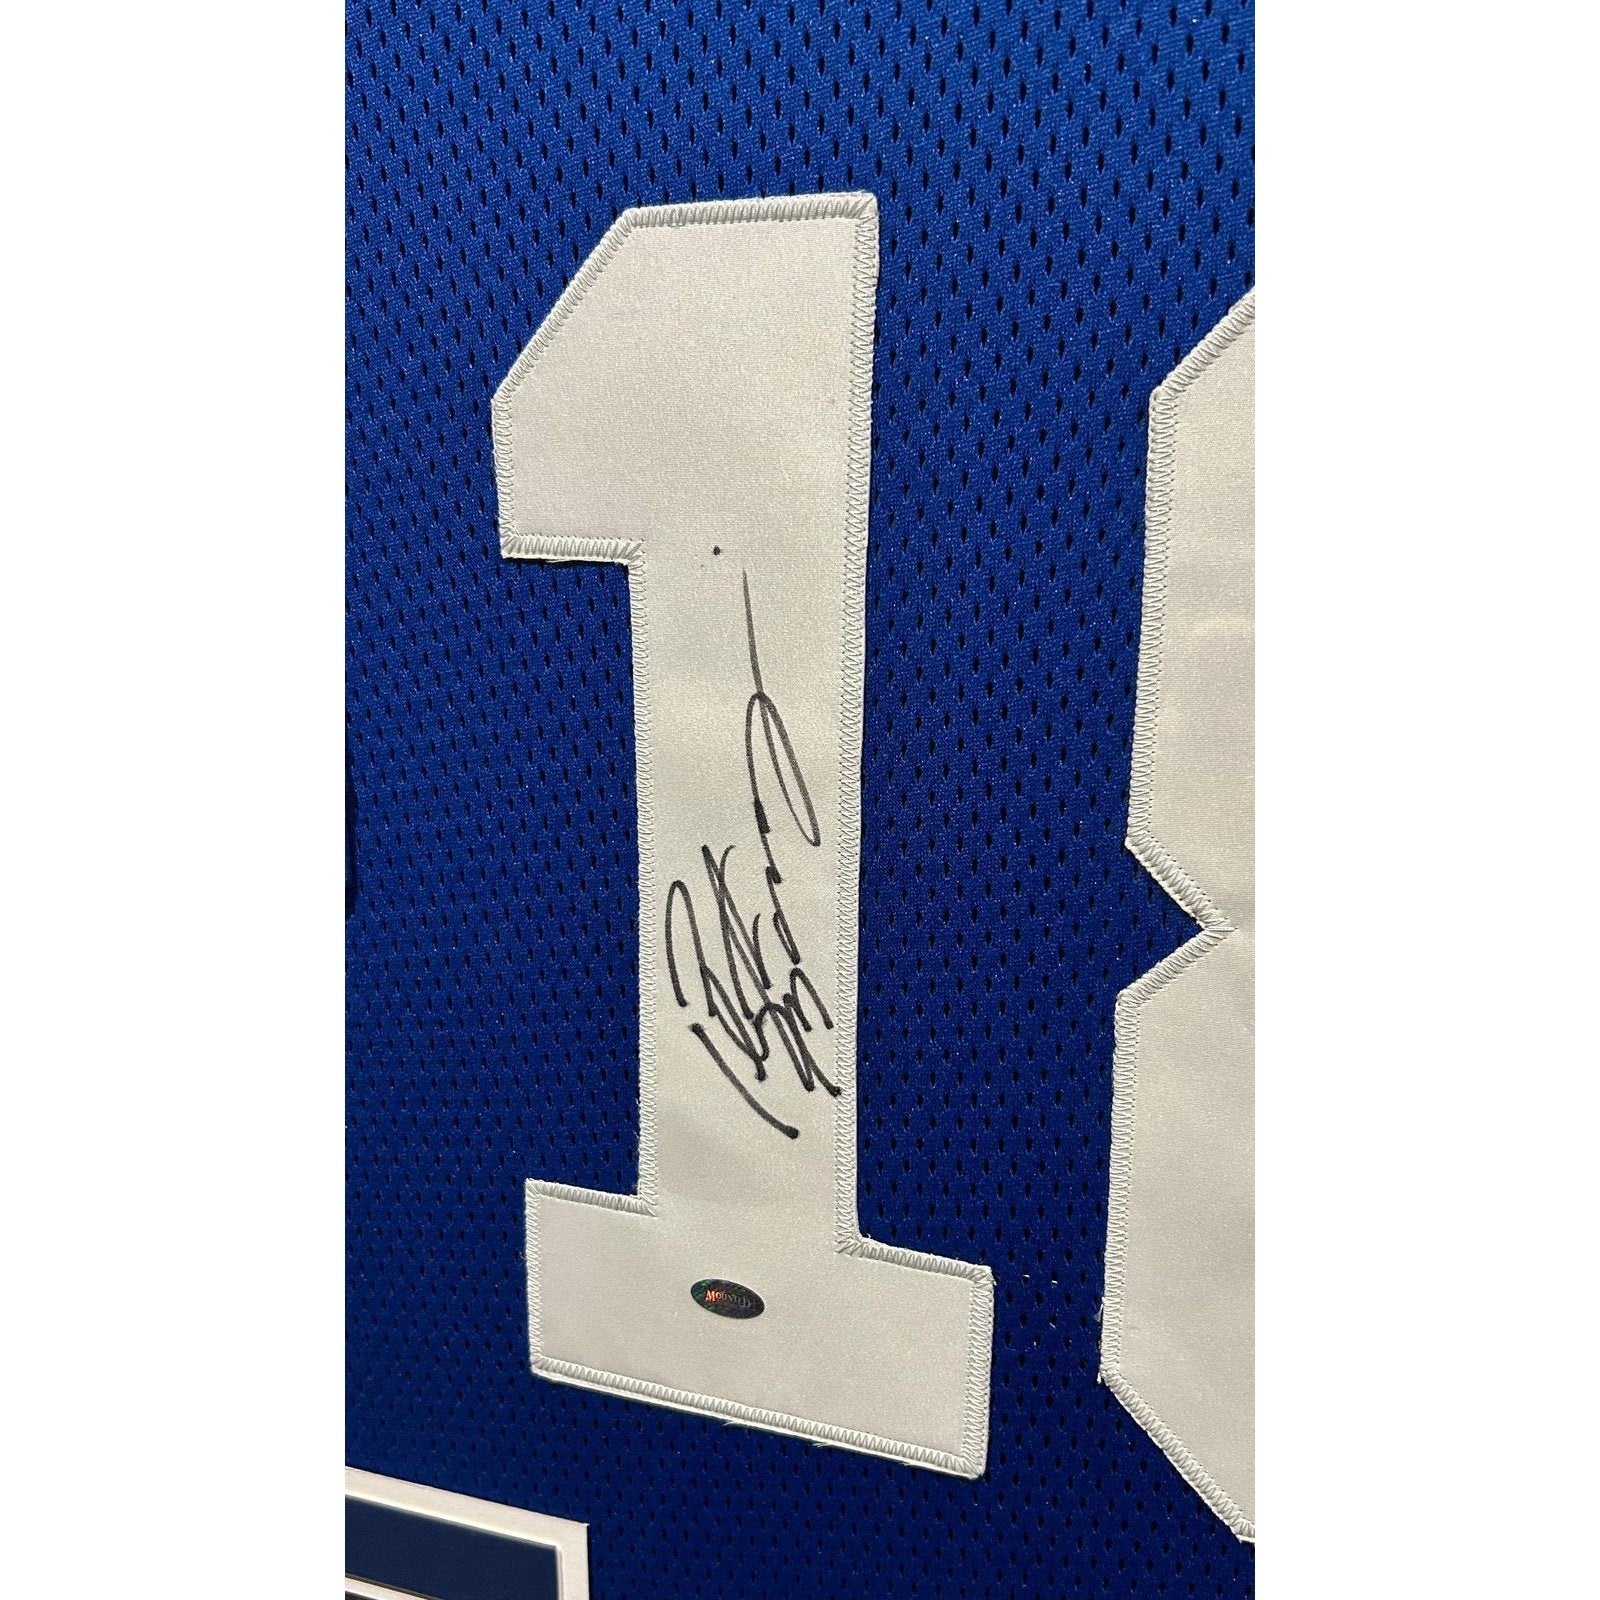 Peyton Manning Framed Jersey Mounted Memories Autographed Signed Colts